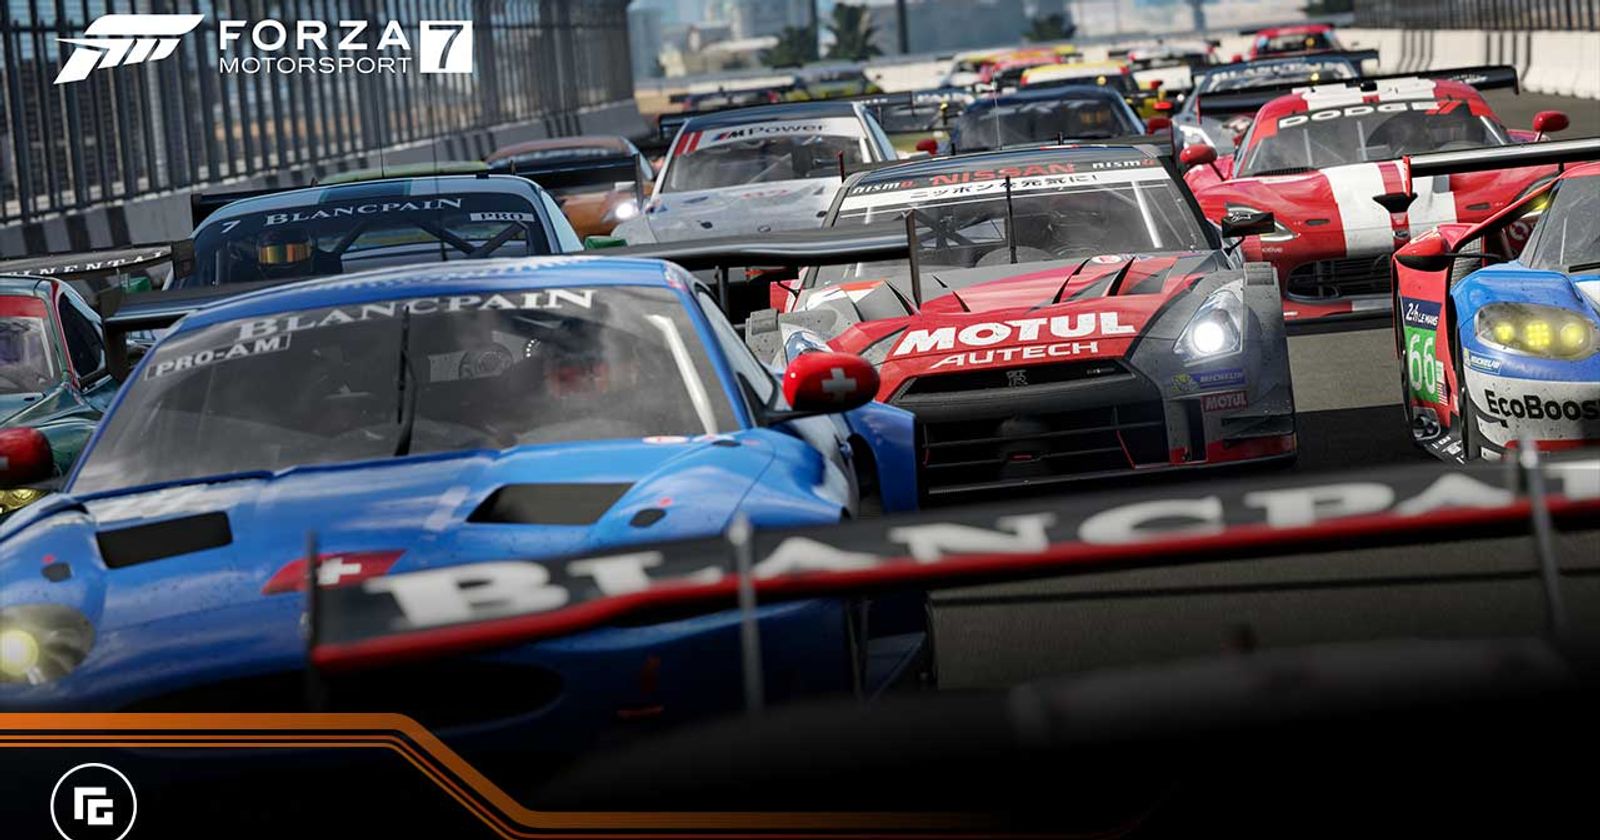 How to get free and premium DLC cars in Forza Motorsport 6